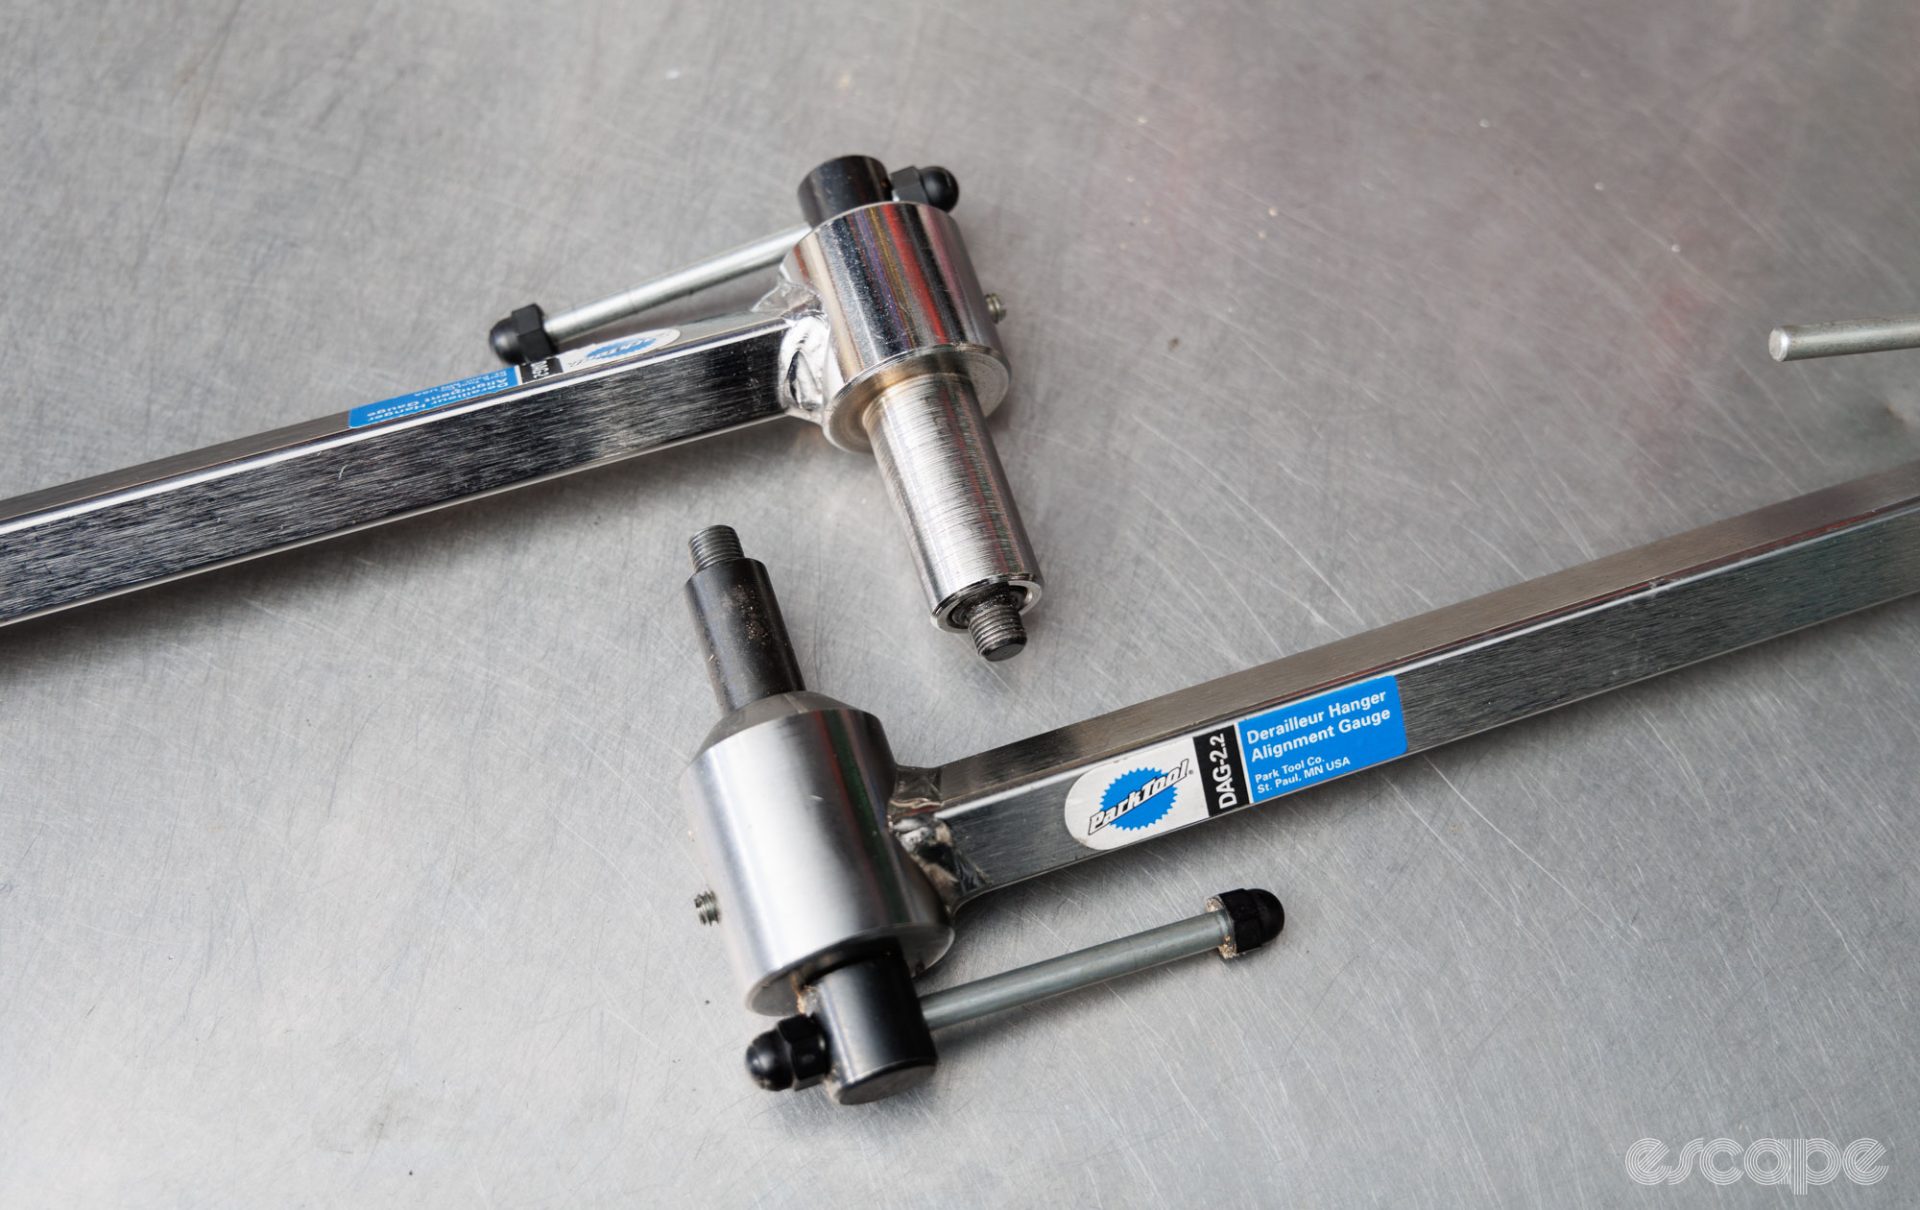 Park Tool DAG-2 and DAG-2.2 derailleur hanger tools aligned to each other on a bench. 